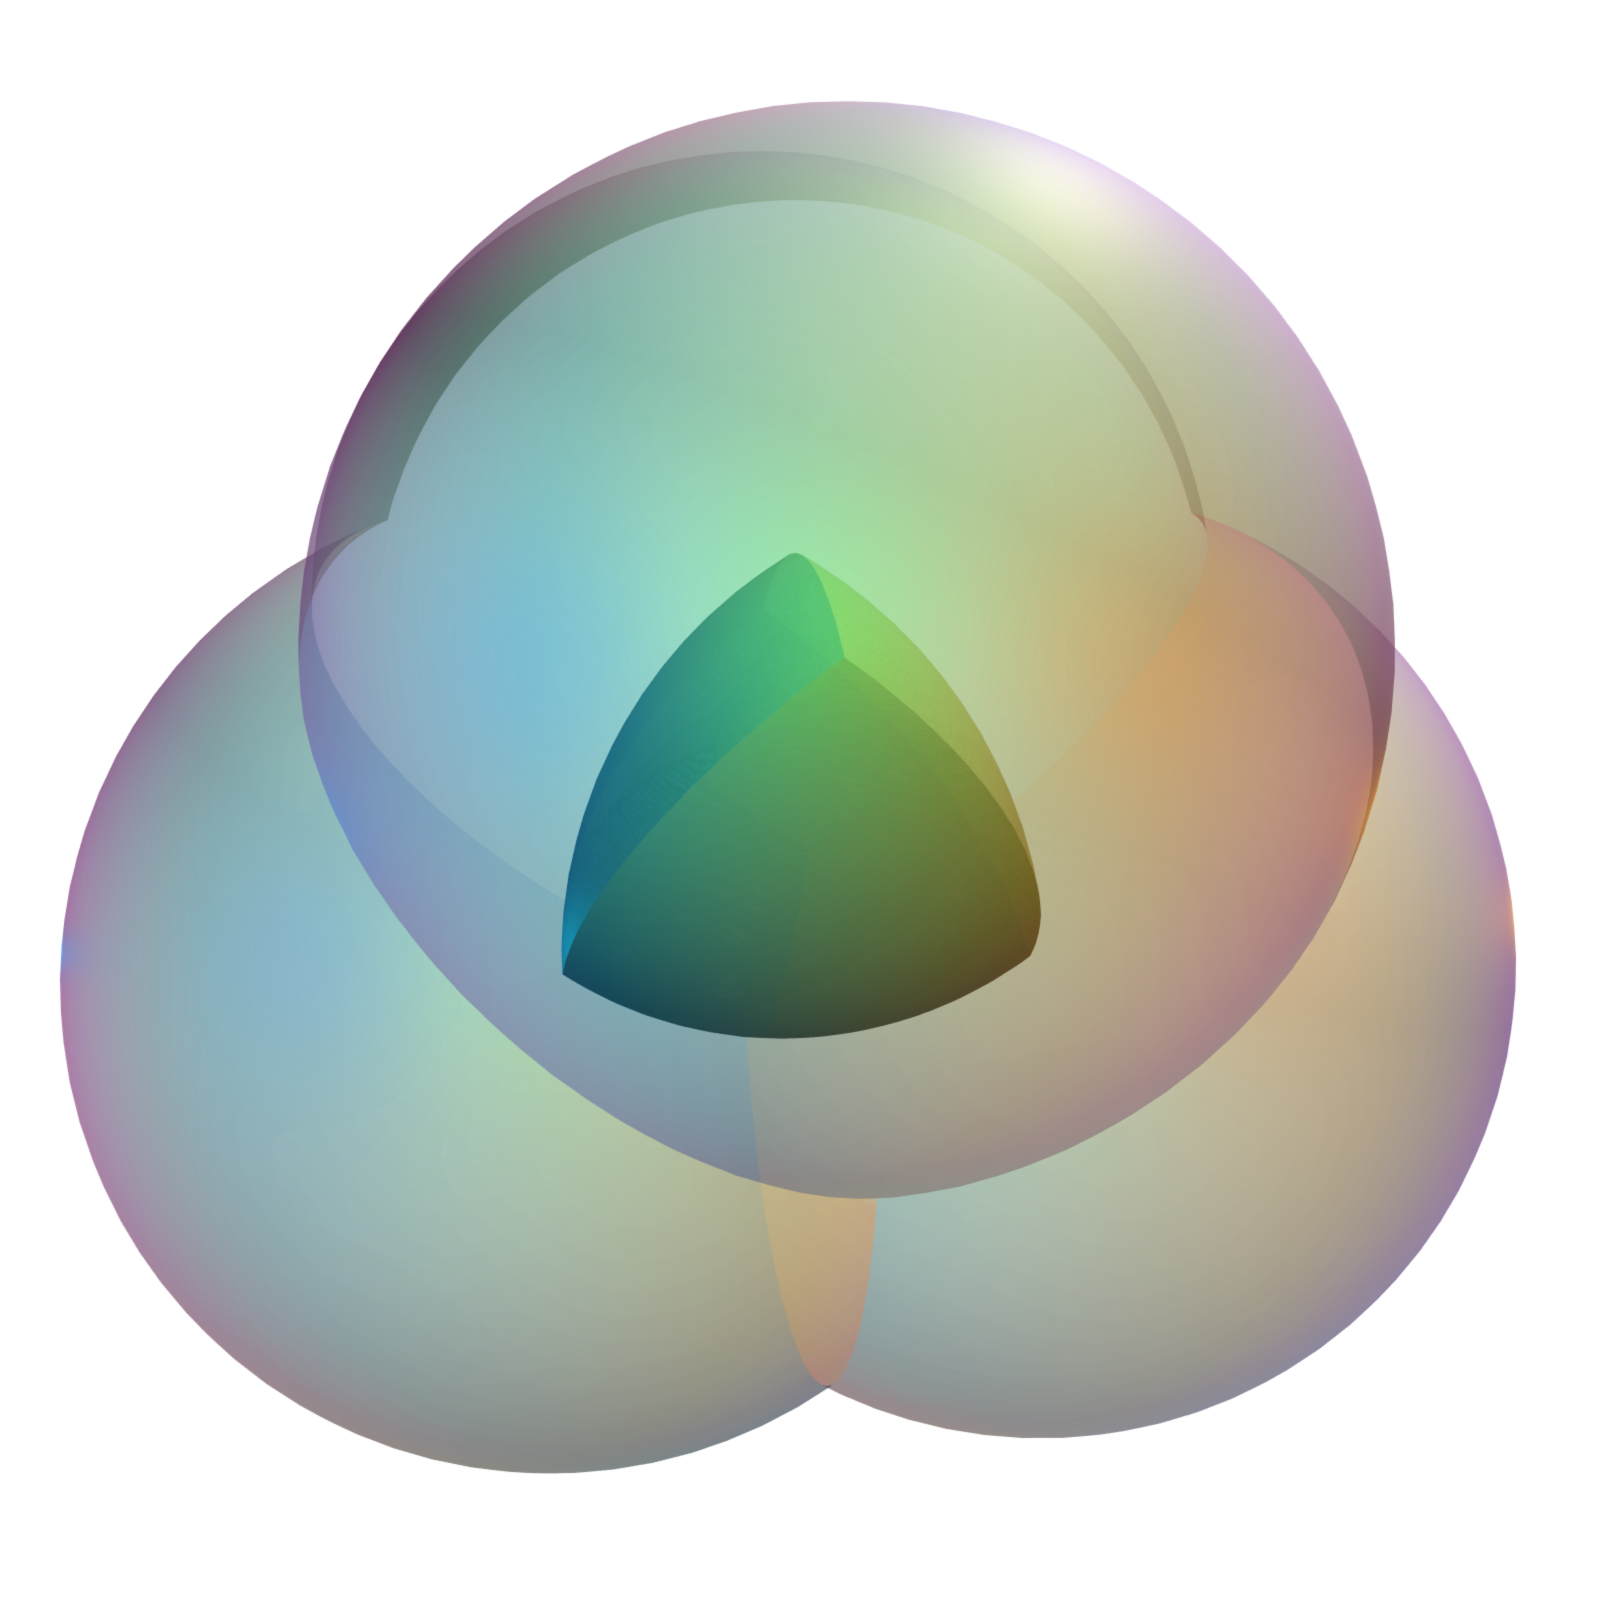 cone clipart sphere object